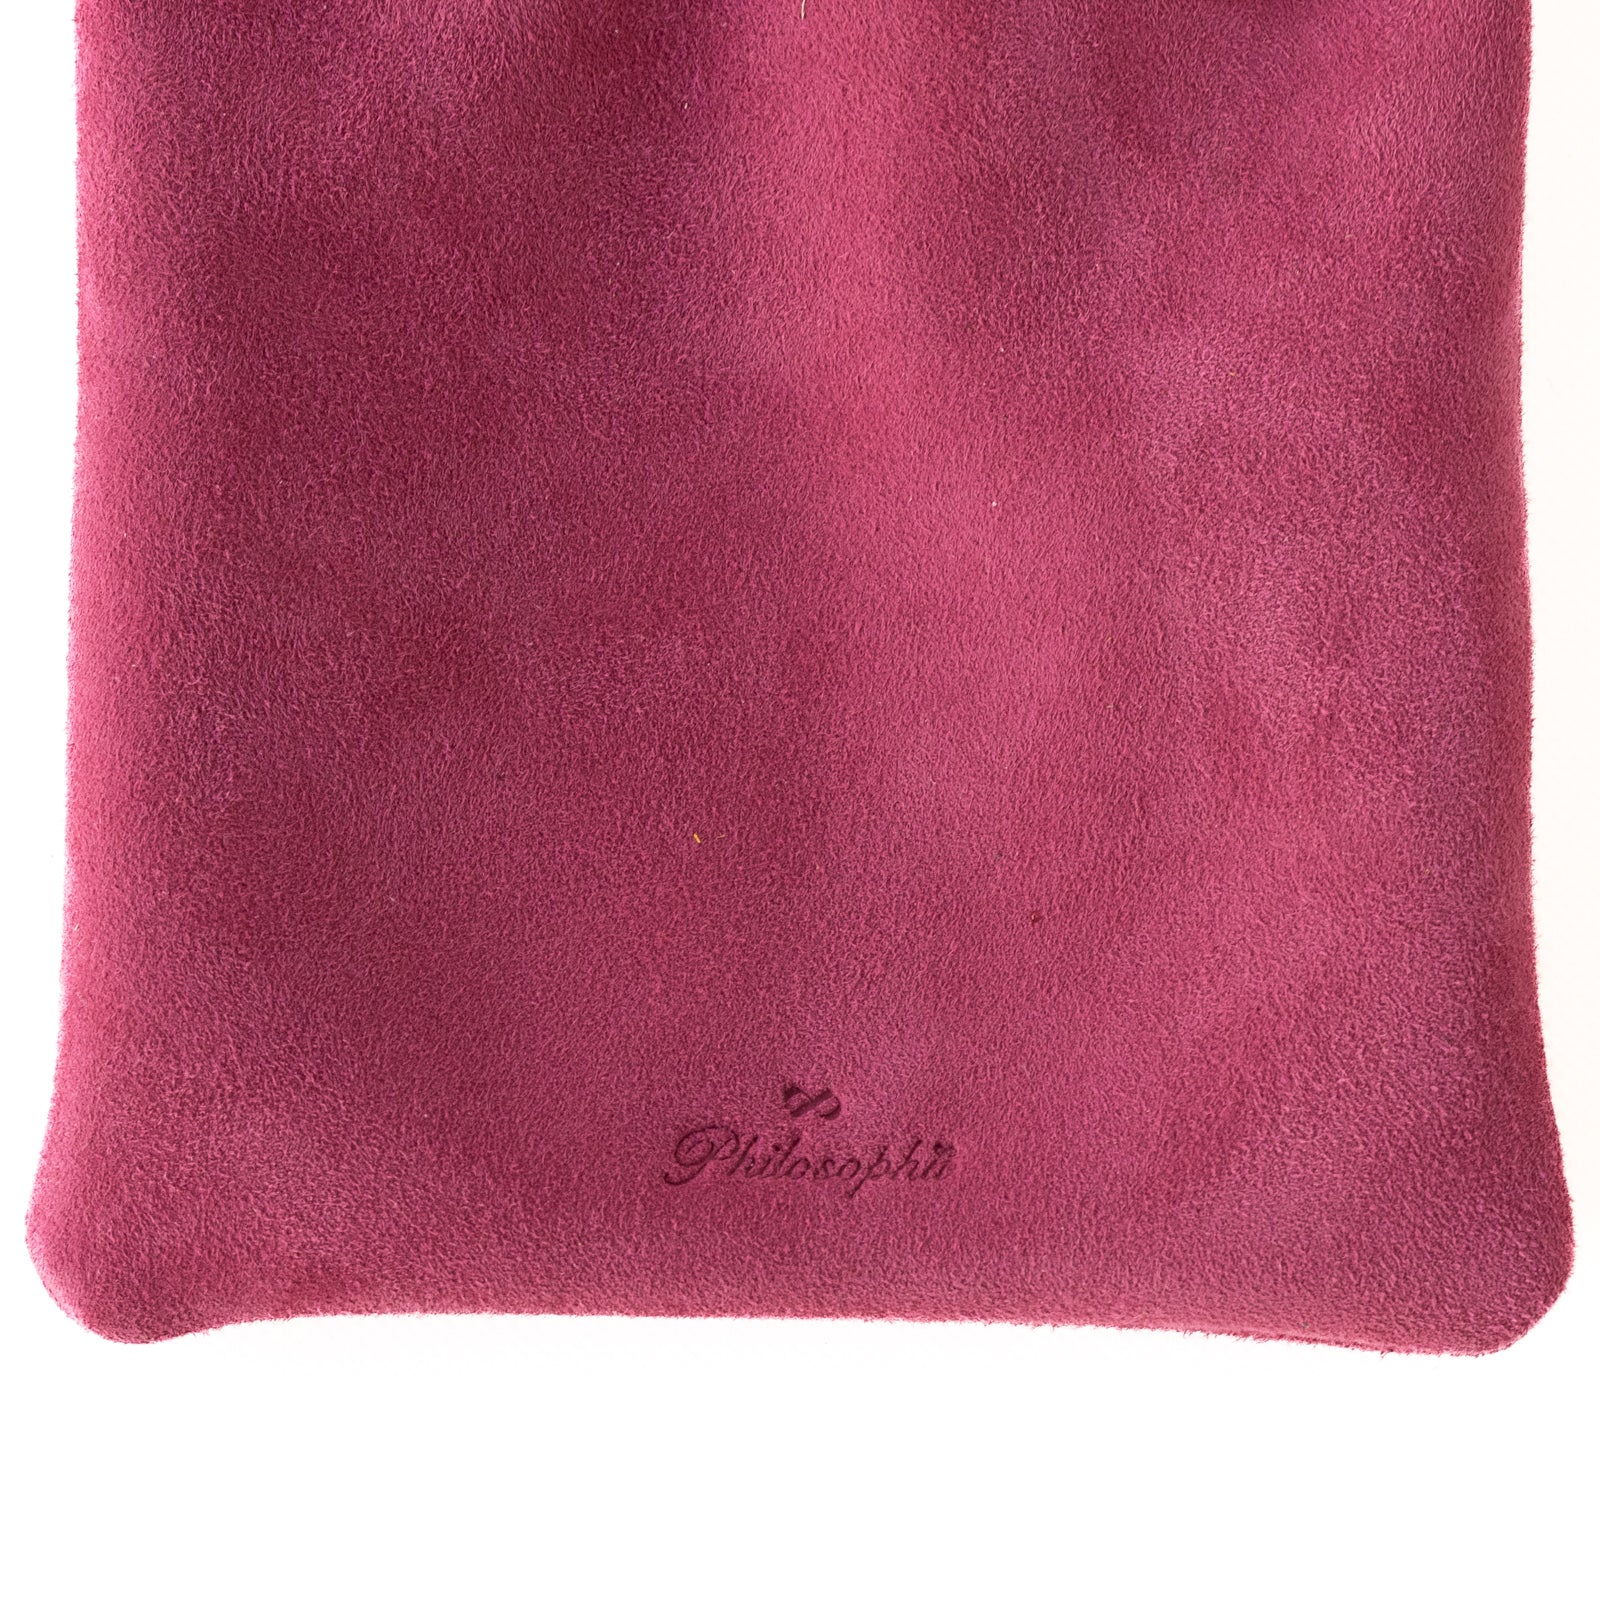 Mini drawstring pouch S suede leather